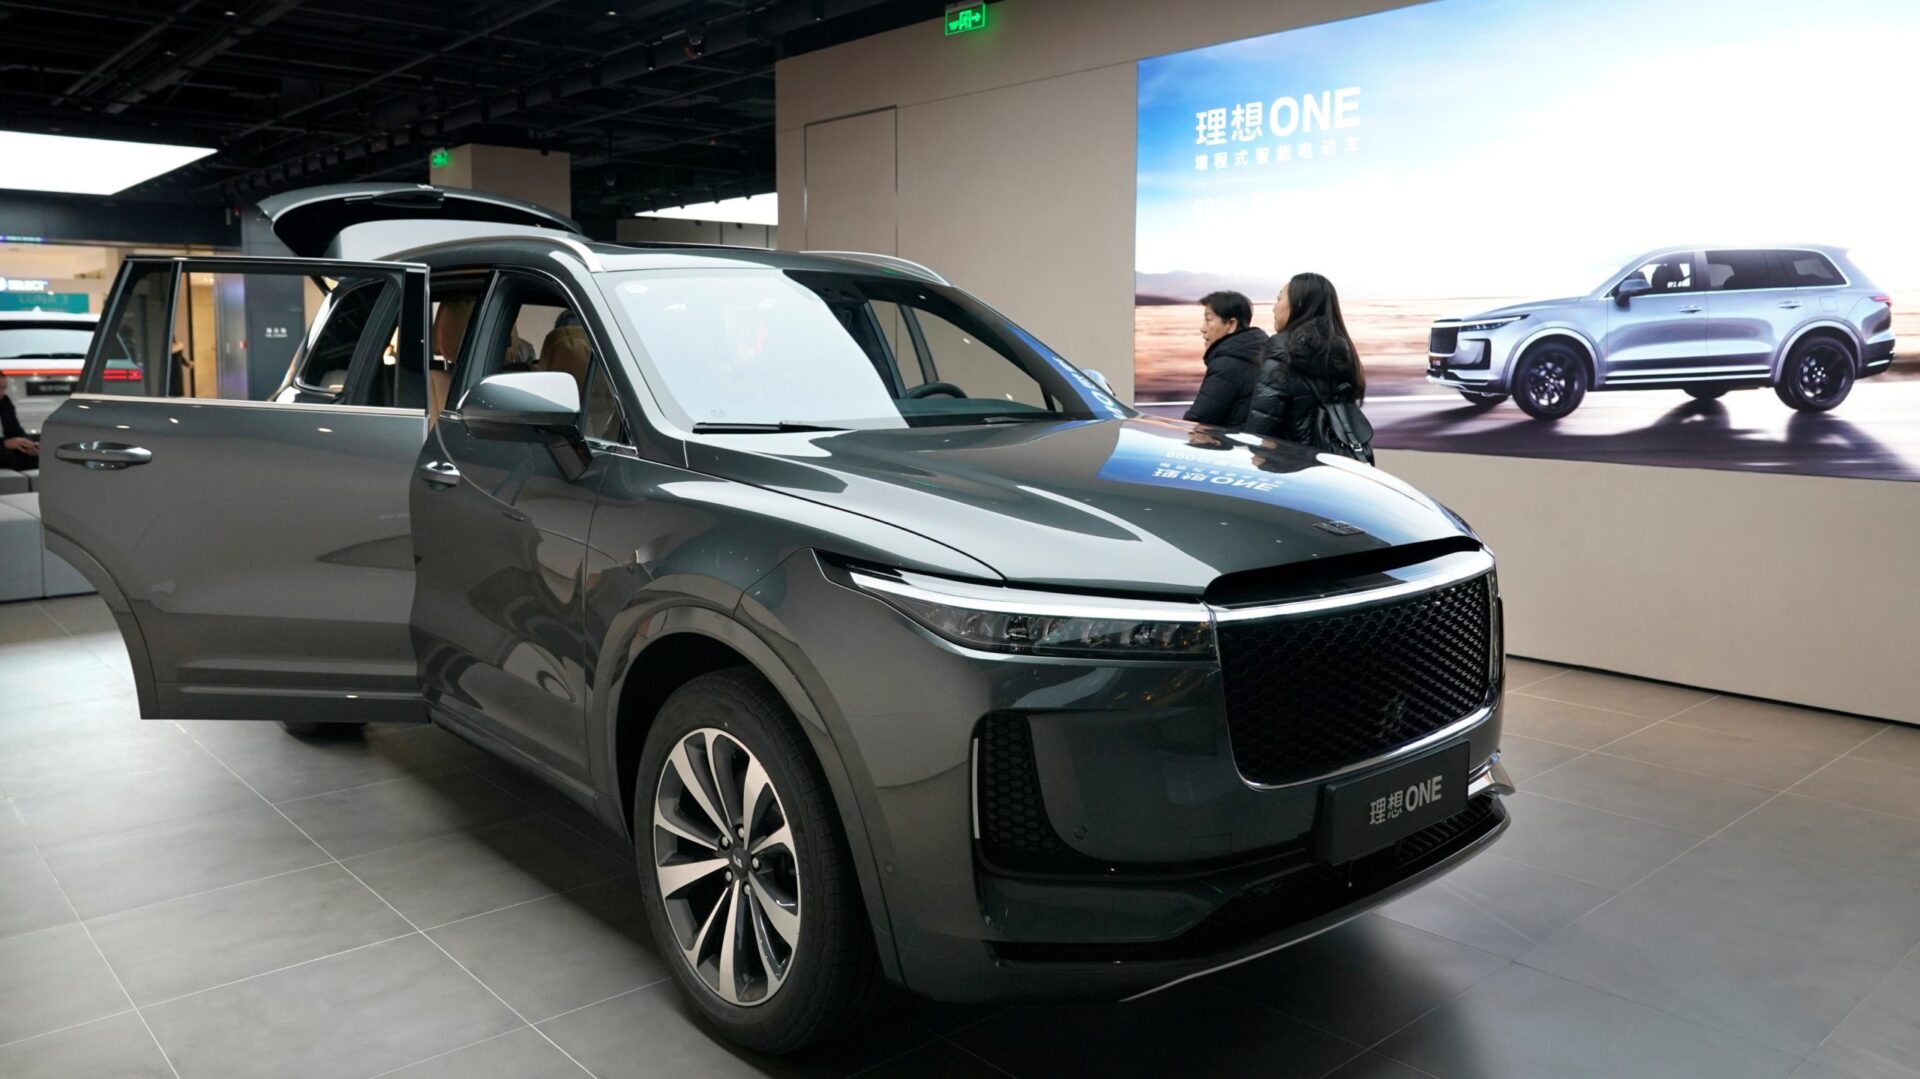 Chinese electric vehicle maker Li Auto aims to raise up to 950 million